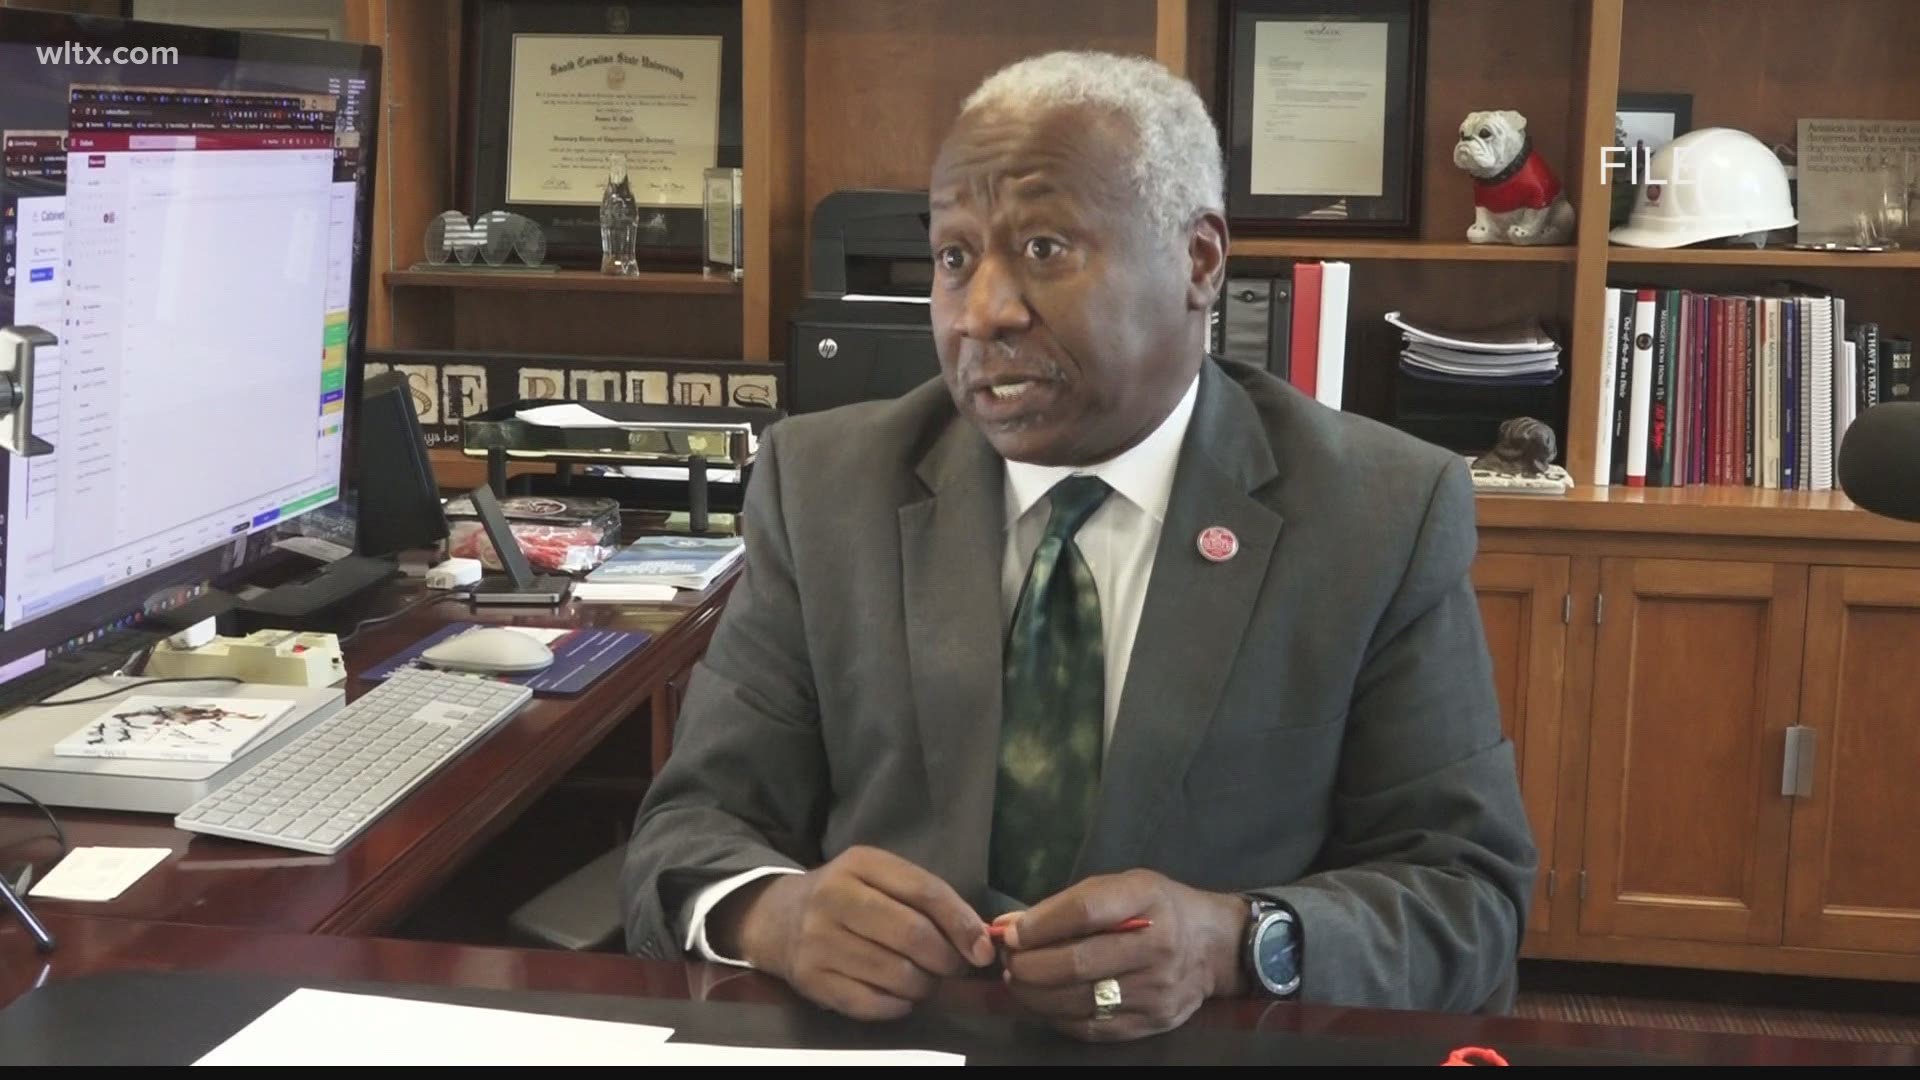 SCSU president James Clark has been fired effective immediately.  The decision was made during a special called meeting.